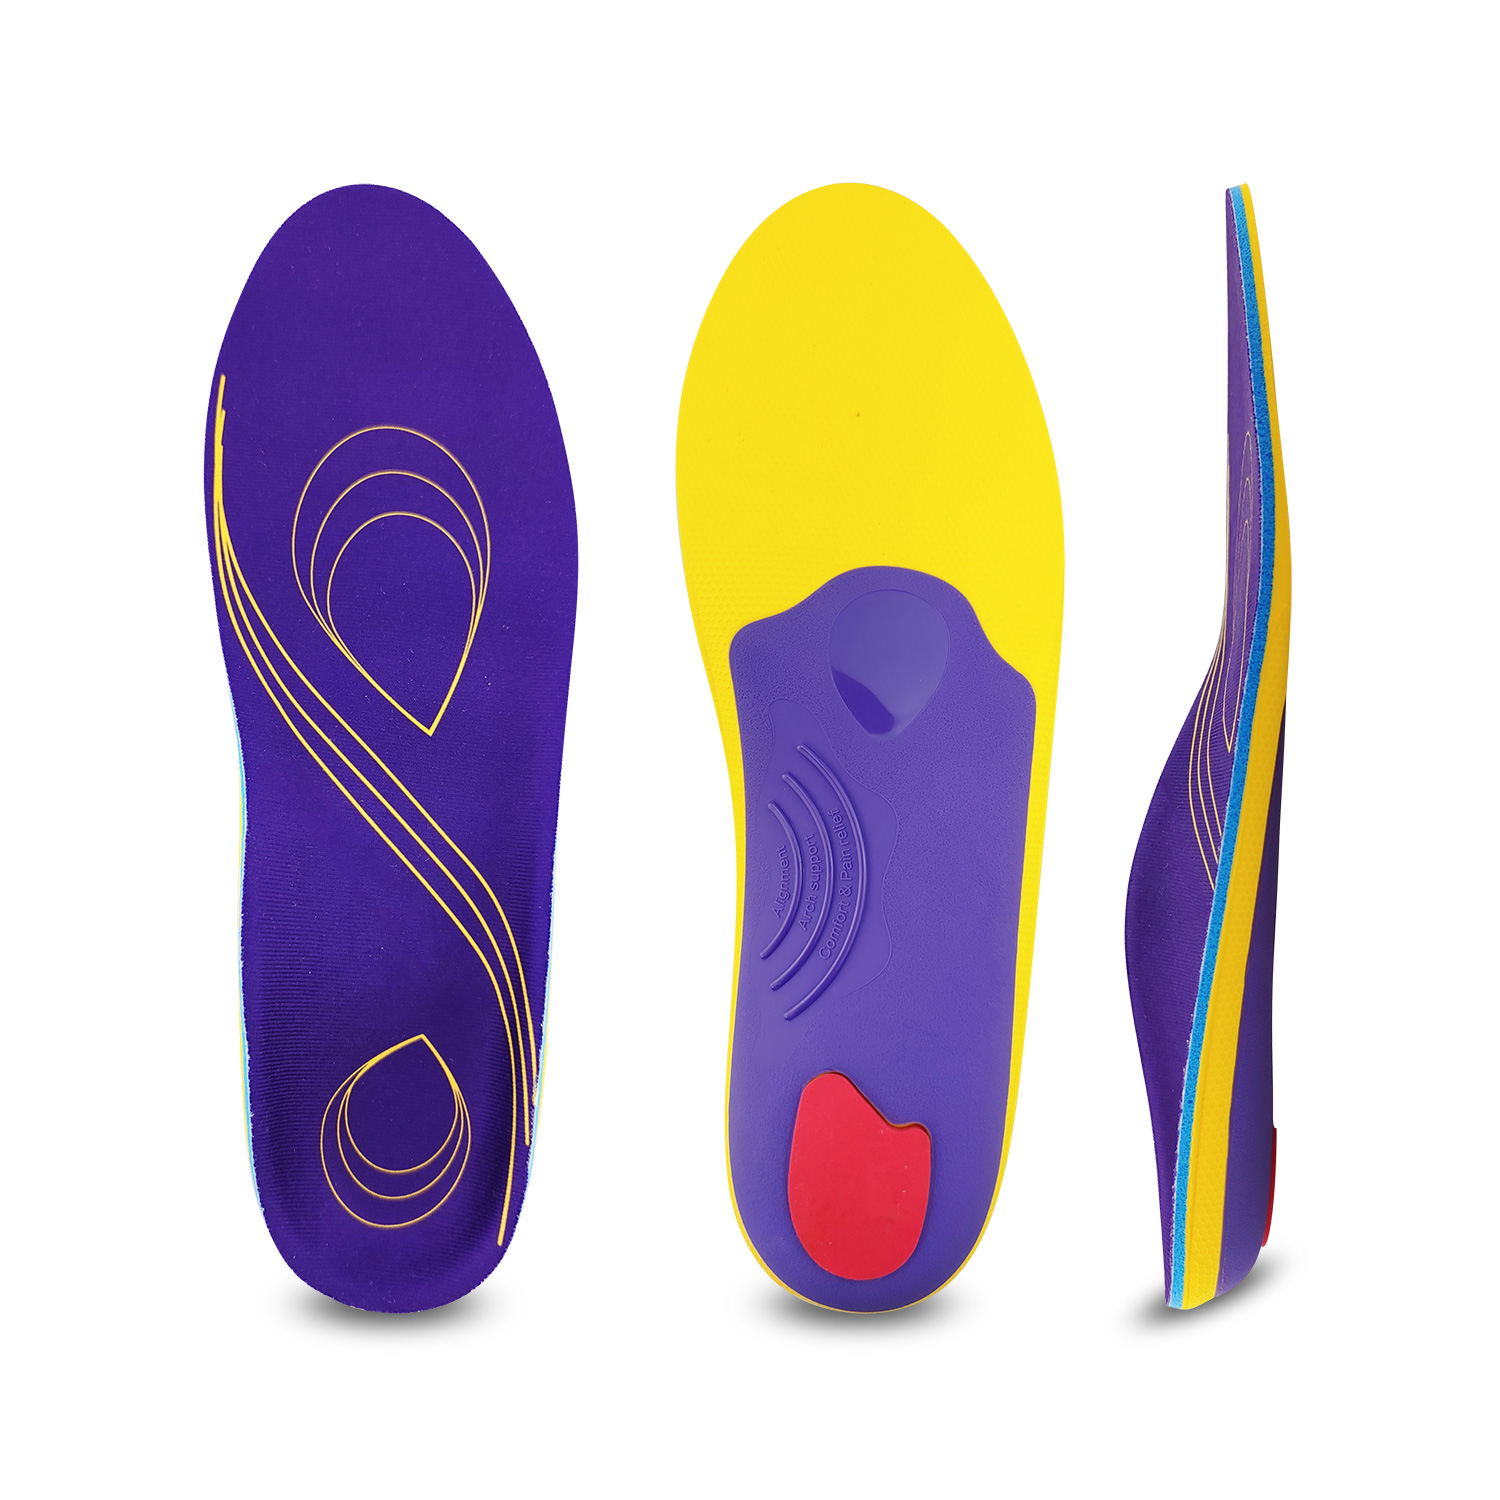 Specially designed cushion insole for high impact performance activities